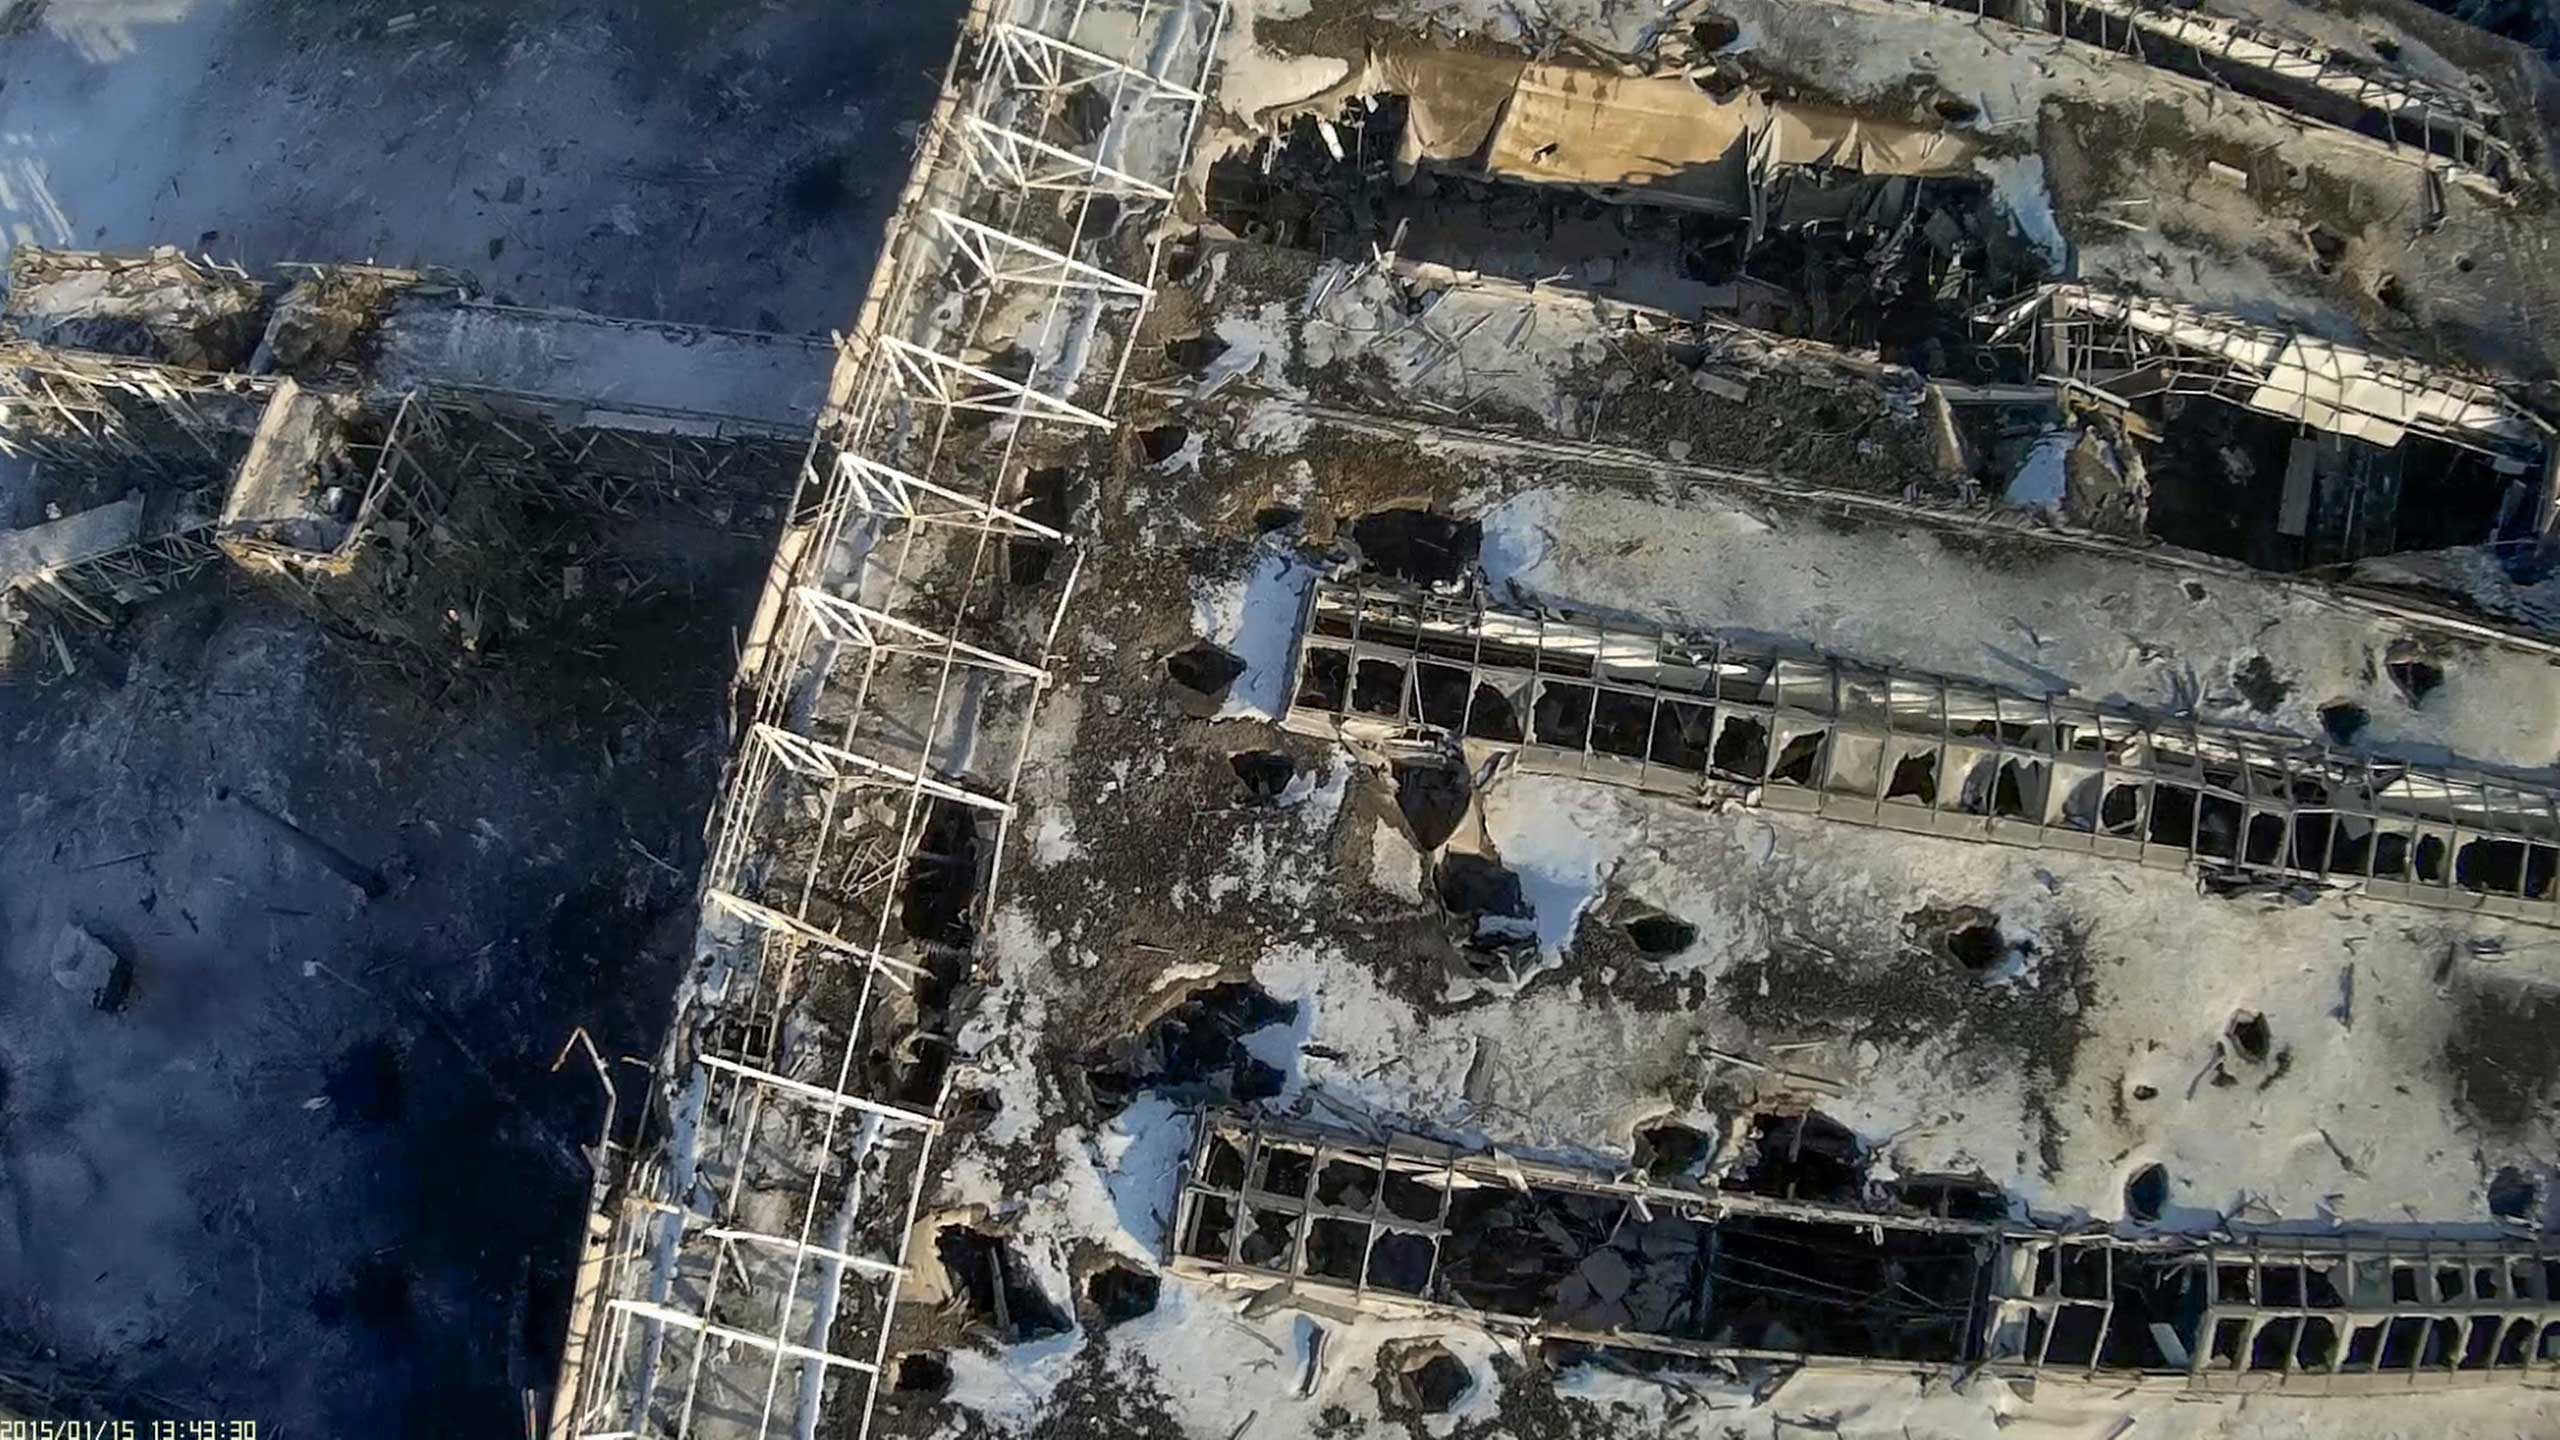 The destroyed airport in Donetsk, Jan. 15, 2015.